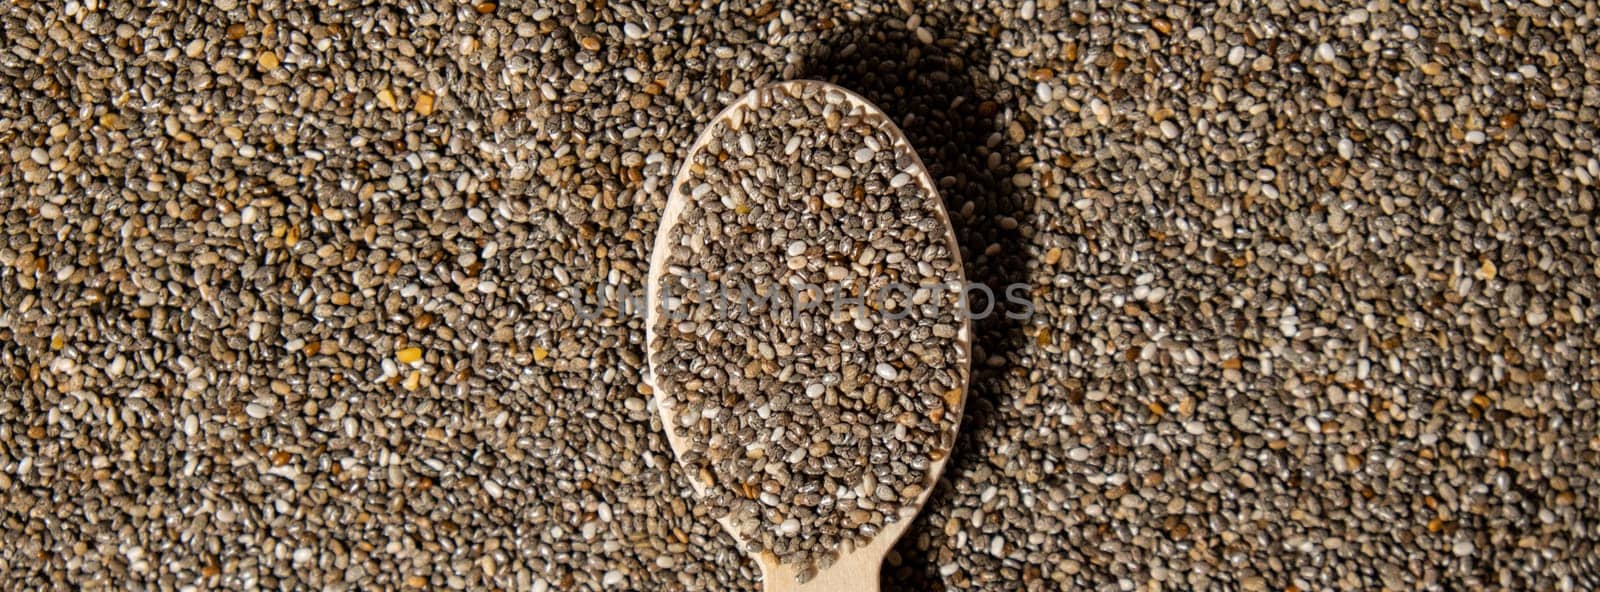 Chia seeds in wooden spoon. Healthy superfood rich in Omega 3 fatty acids. Dry healthy natural ingredient. Chia grains are falling. Vegetarian food